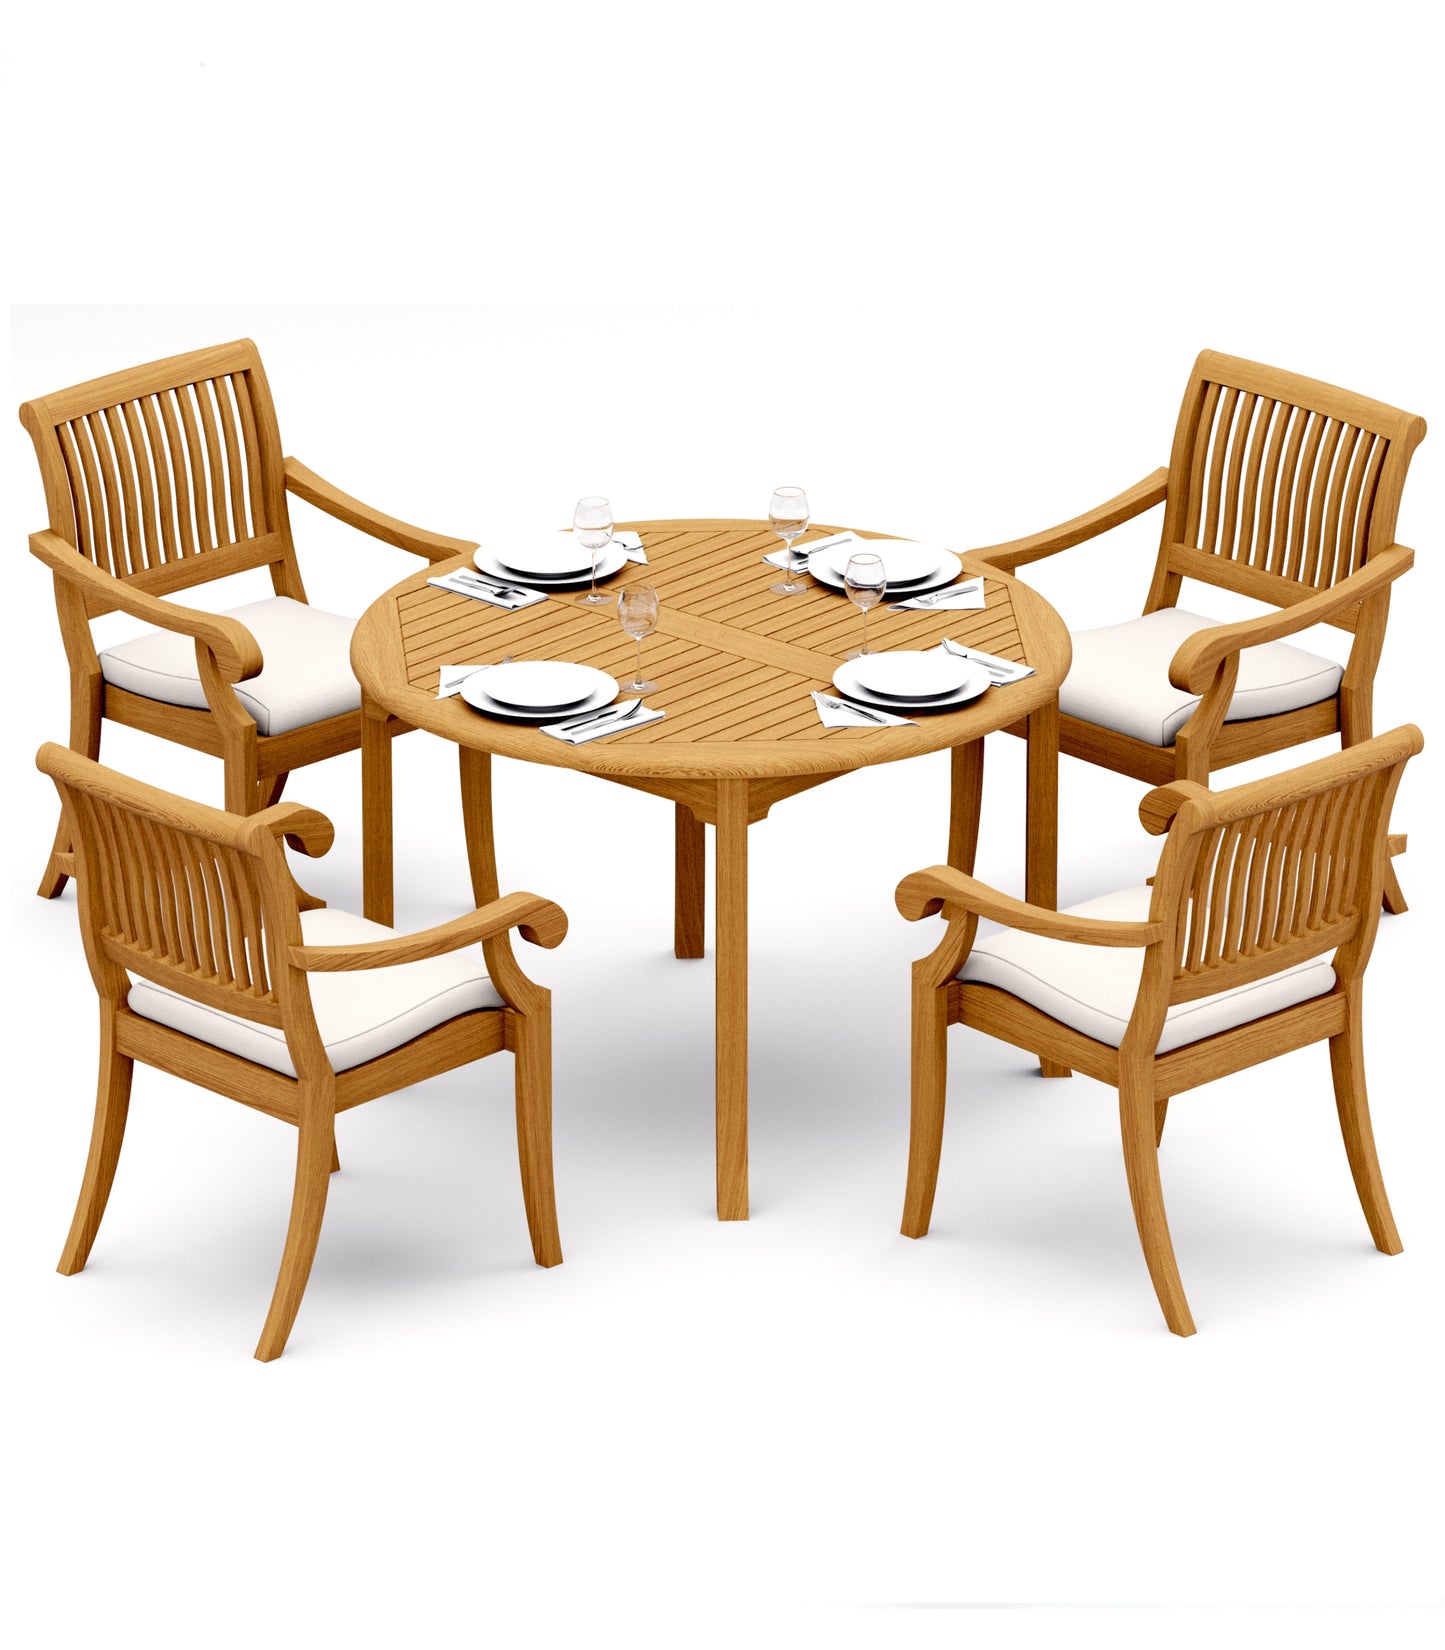 48 Fixed Round Table and with 4 Arbor Arm Chairs